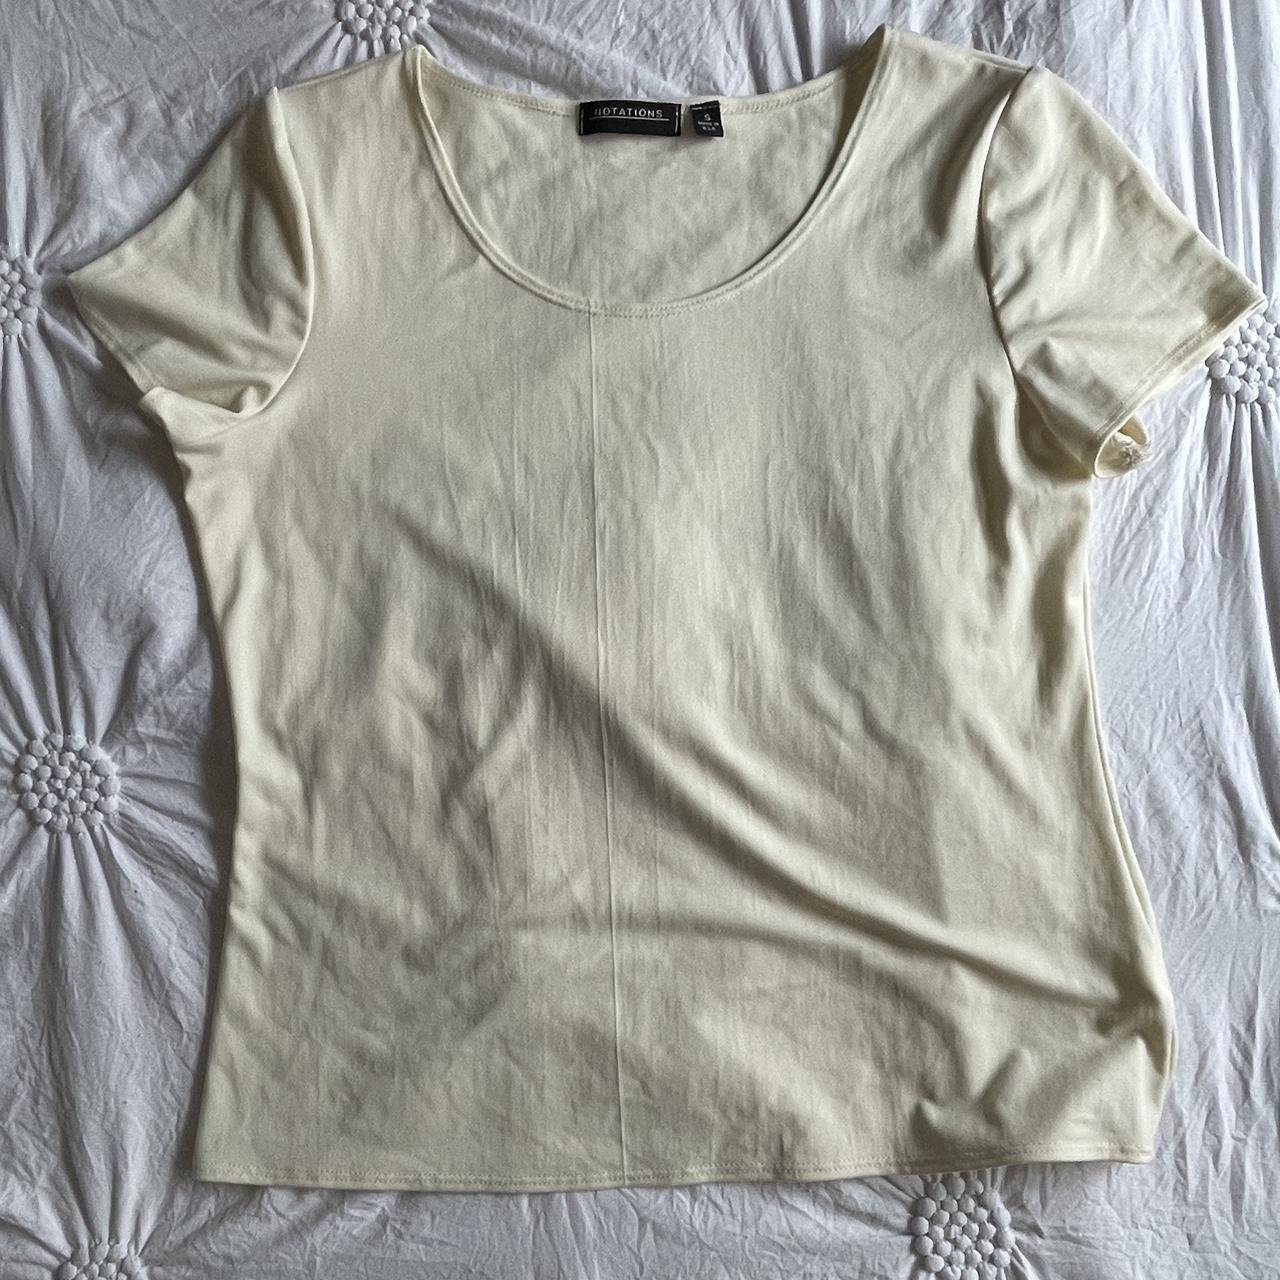 Vintage Cream top By notations size small A little... - Depop